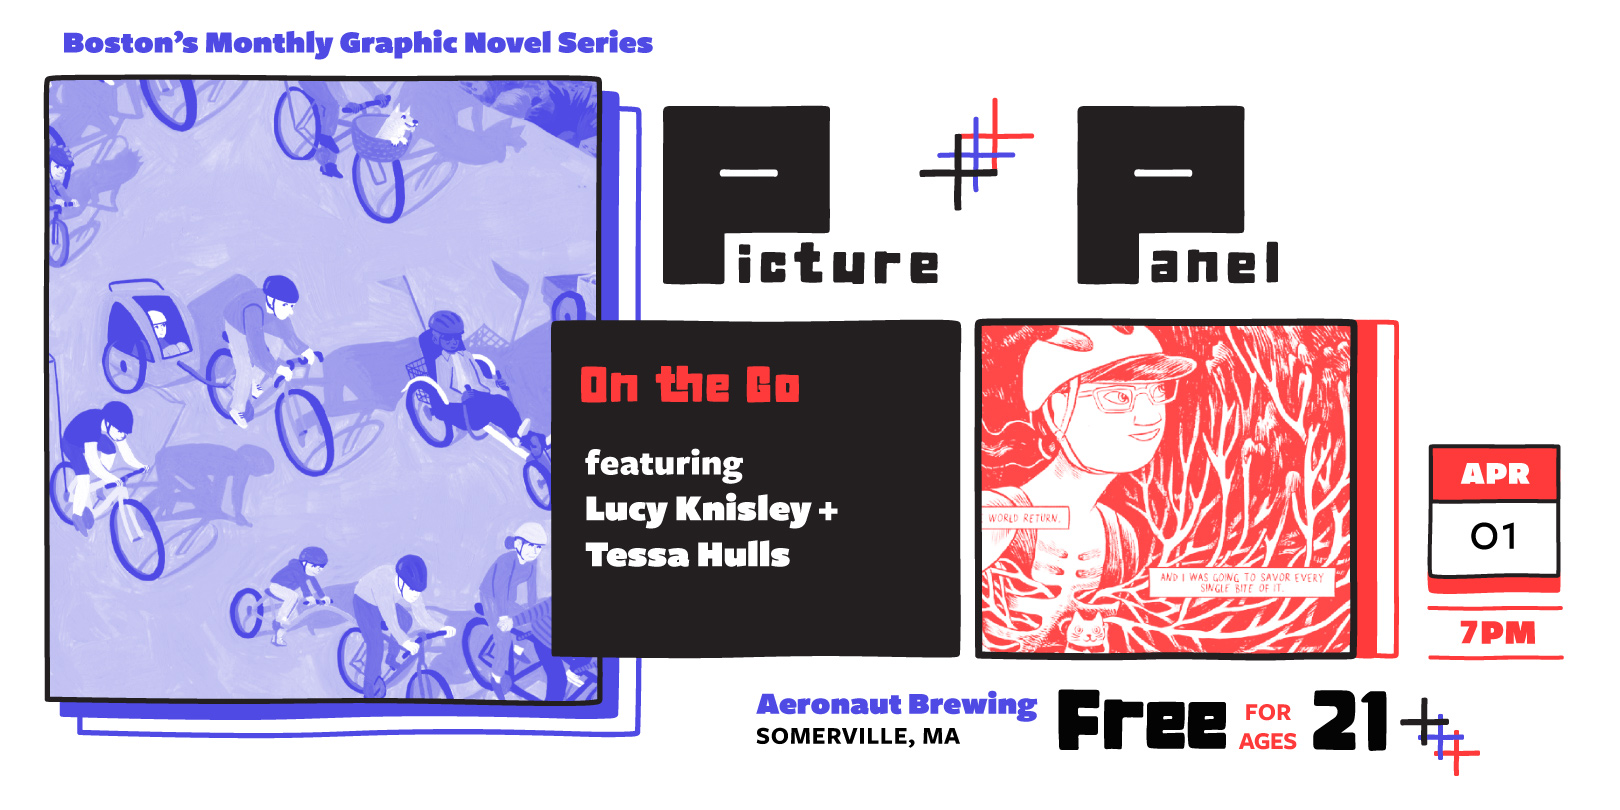 Promotional graphic for boston's monthly graphic novel series event "picture panel: on the go" featuring lucy knisley and tessa hulls at aeronaut brewing in somerville, ma on april 1st, 7 pm, free for ages 21 and up.